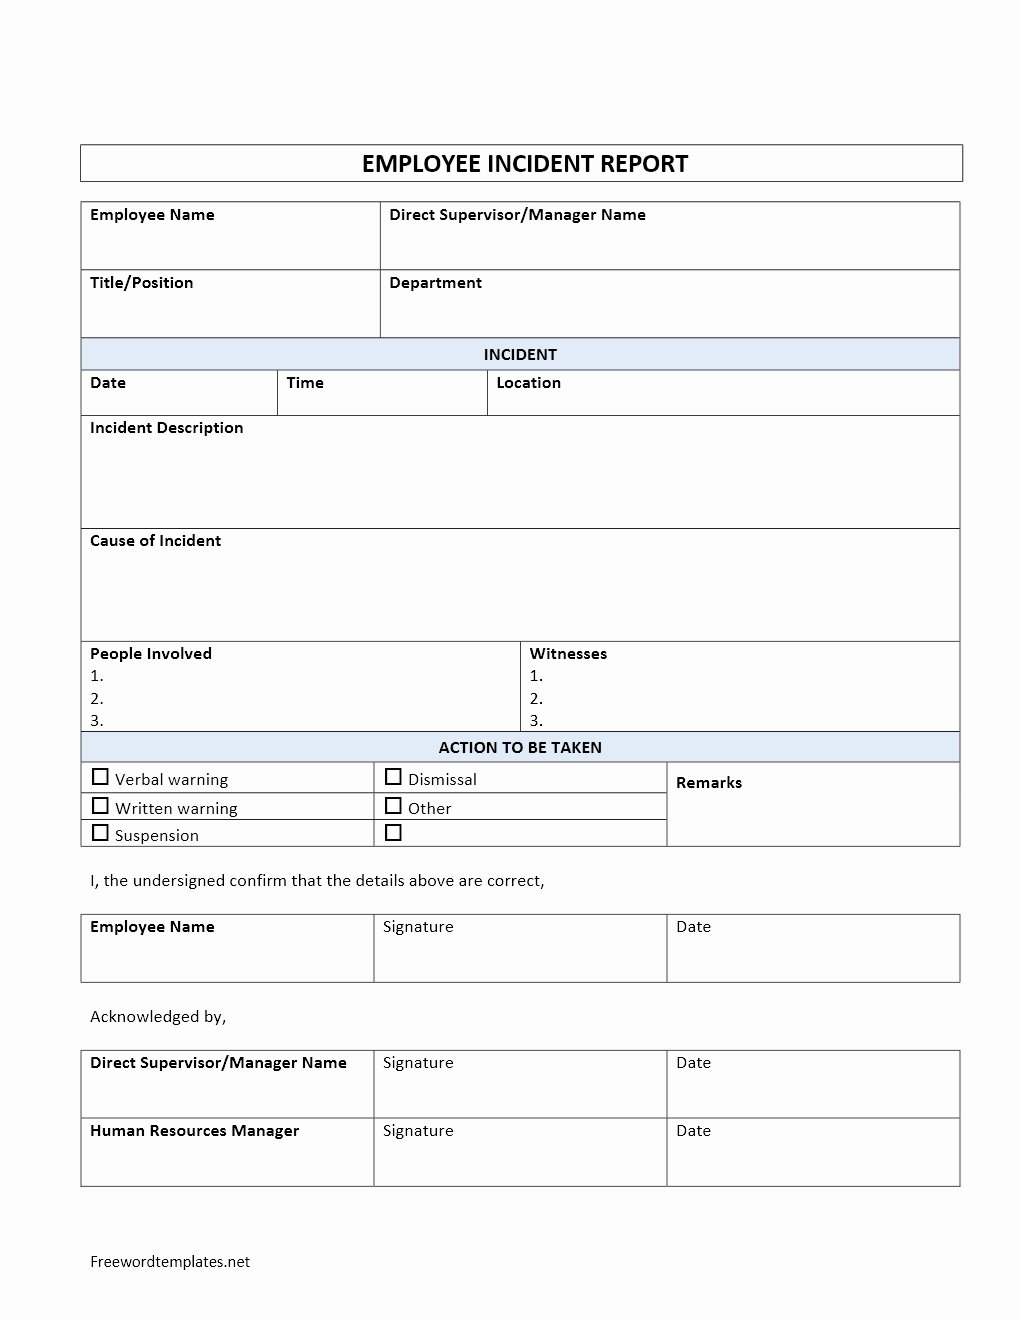 Accident Report form Template Fresh Employee Incident Report